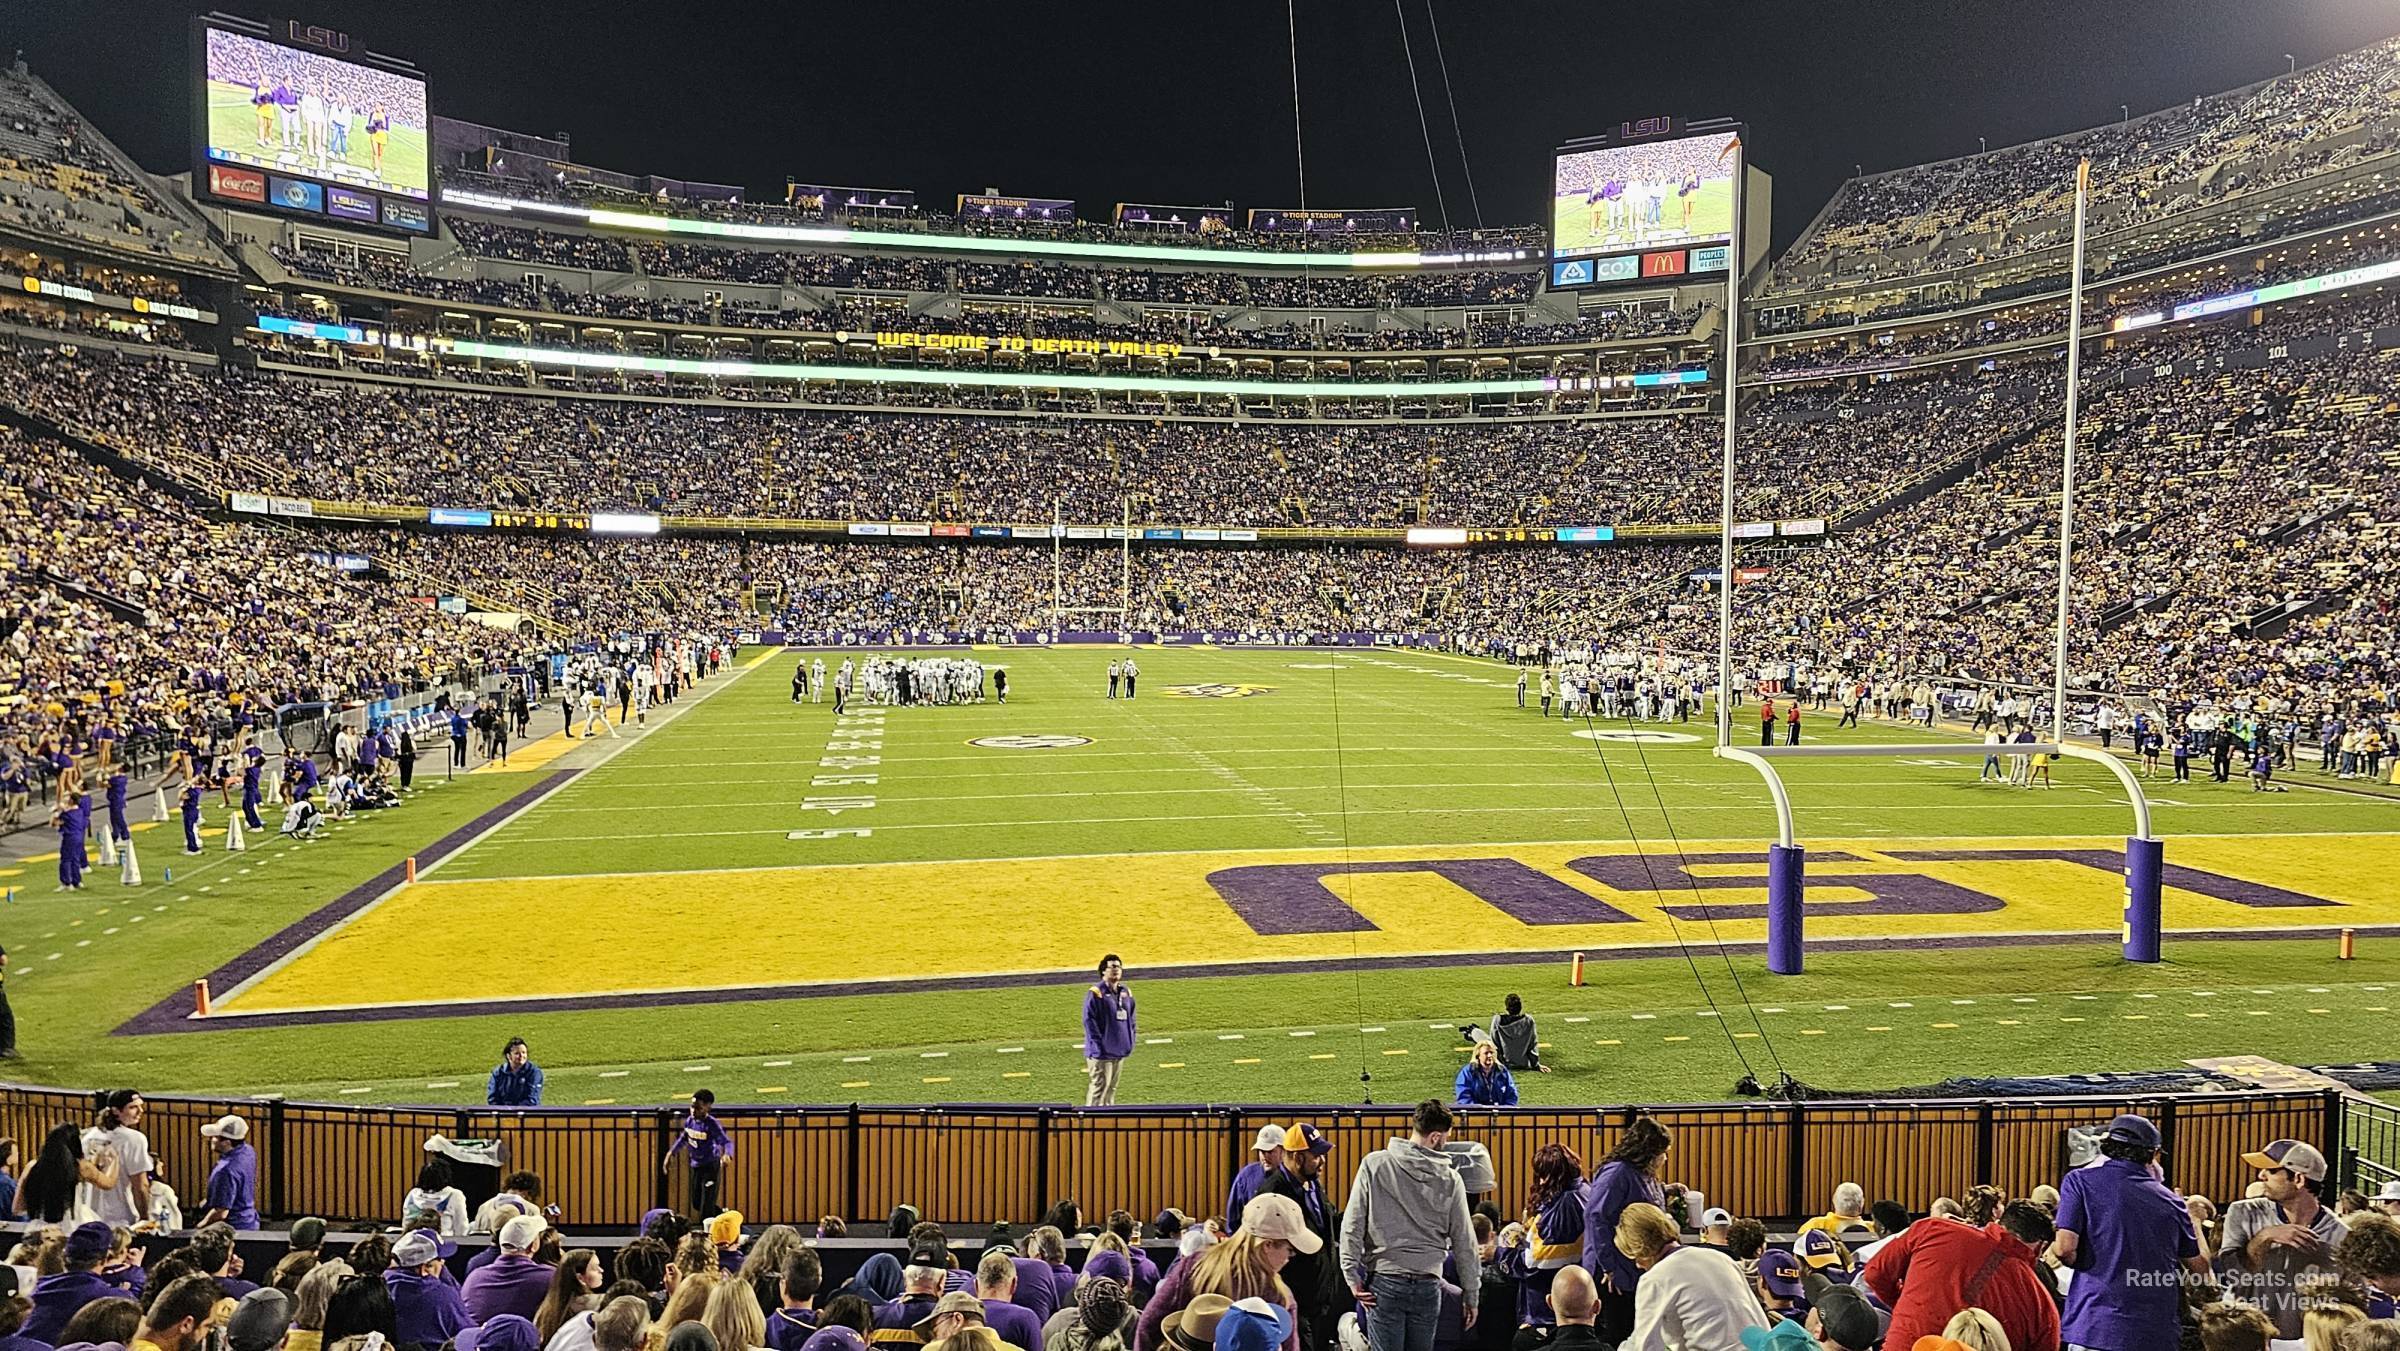 section 215, row 1 seat view  - tiger stadium